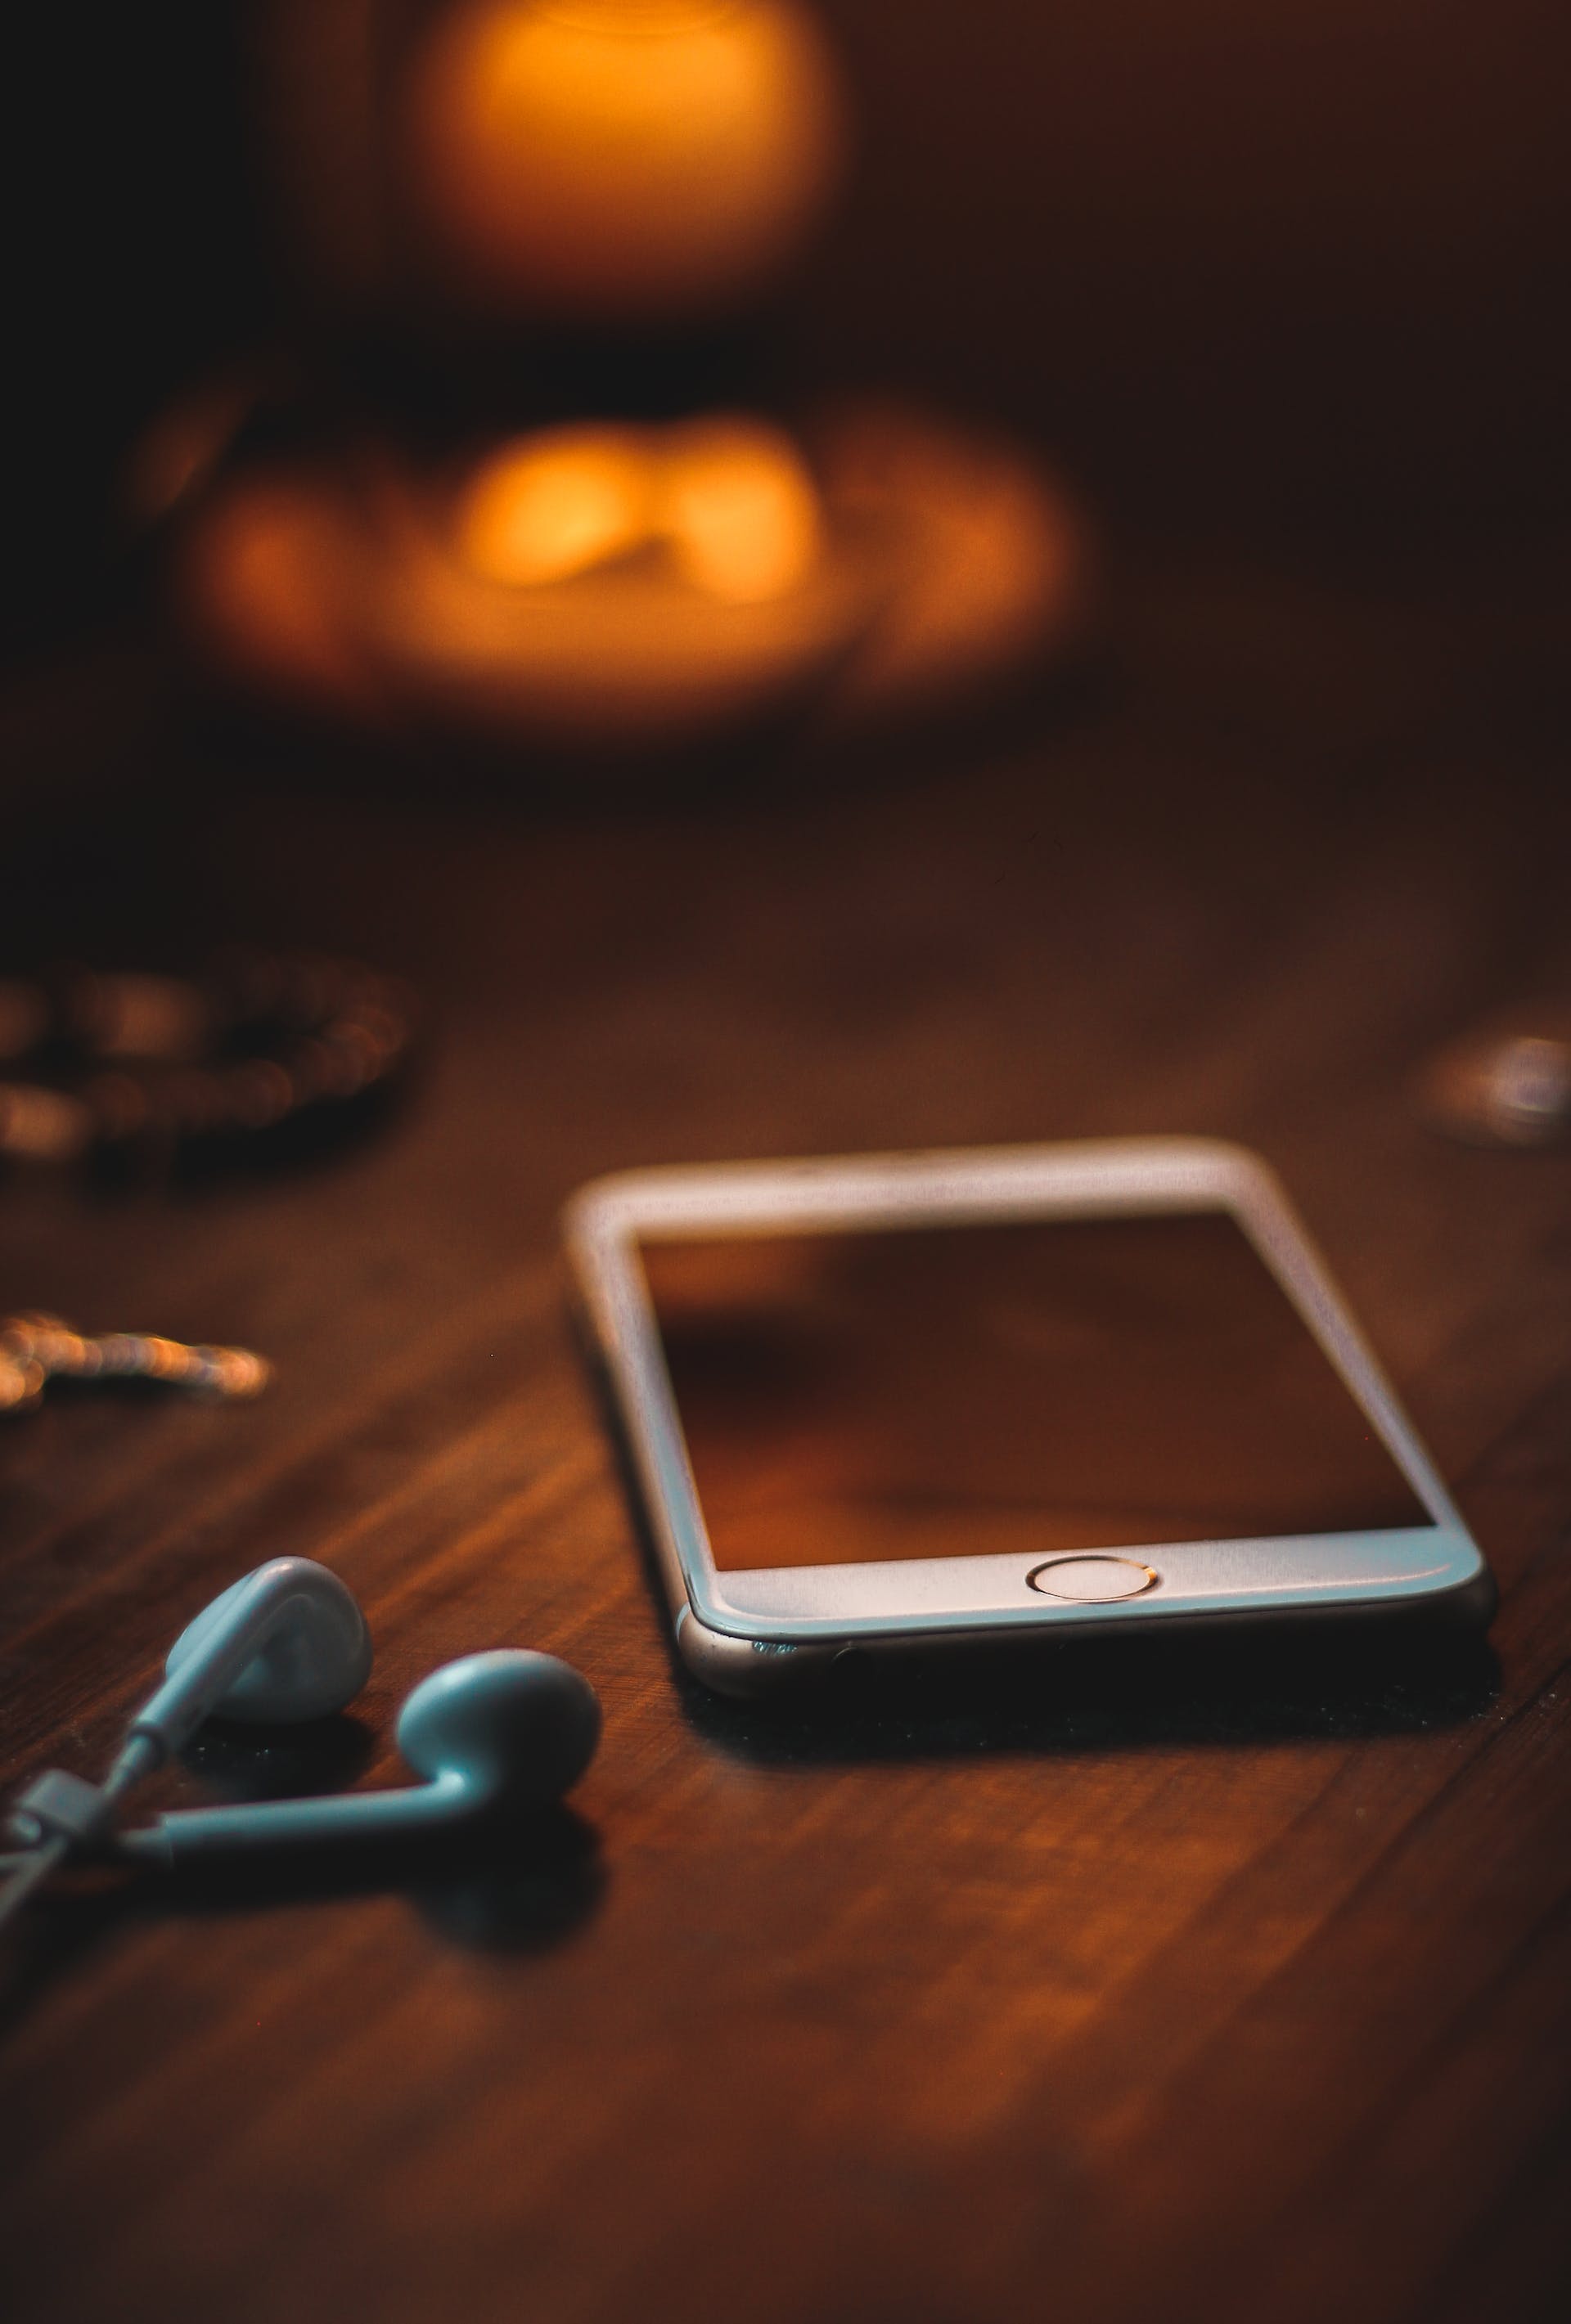 Phone on table | Source: Pexels